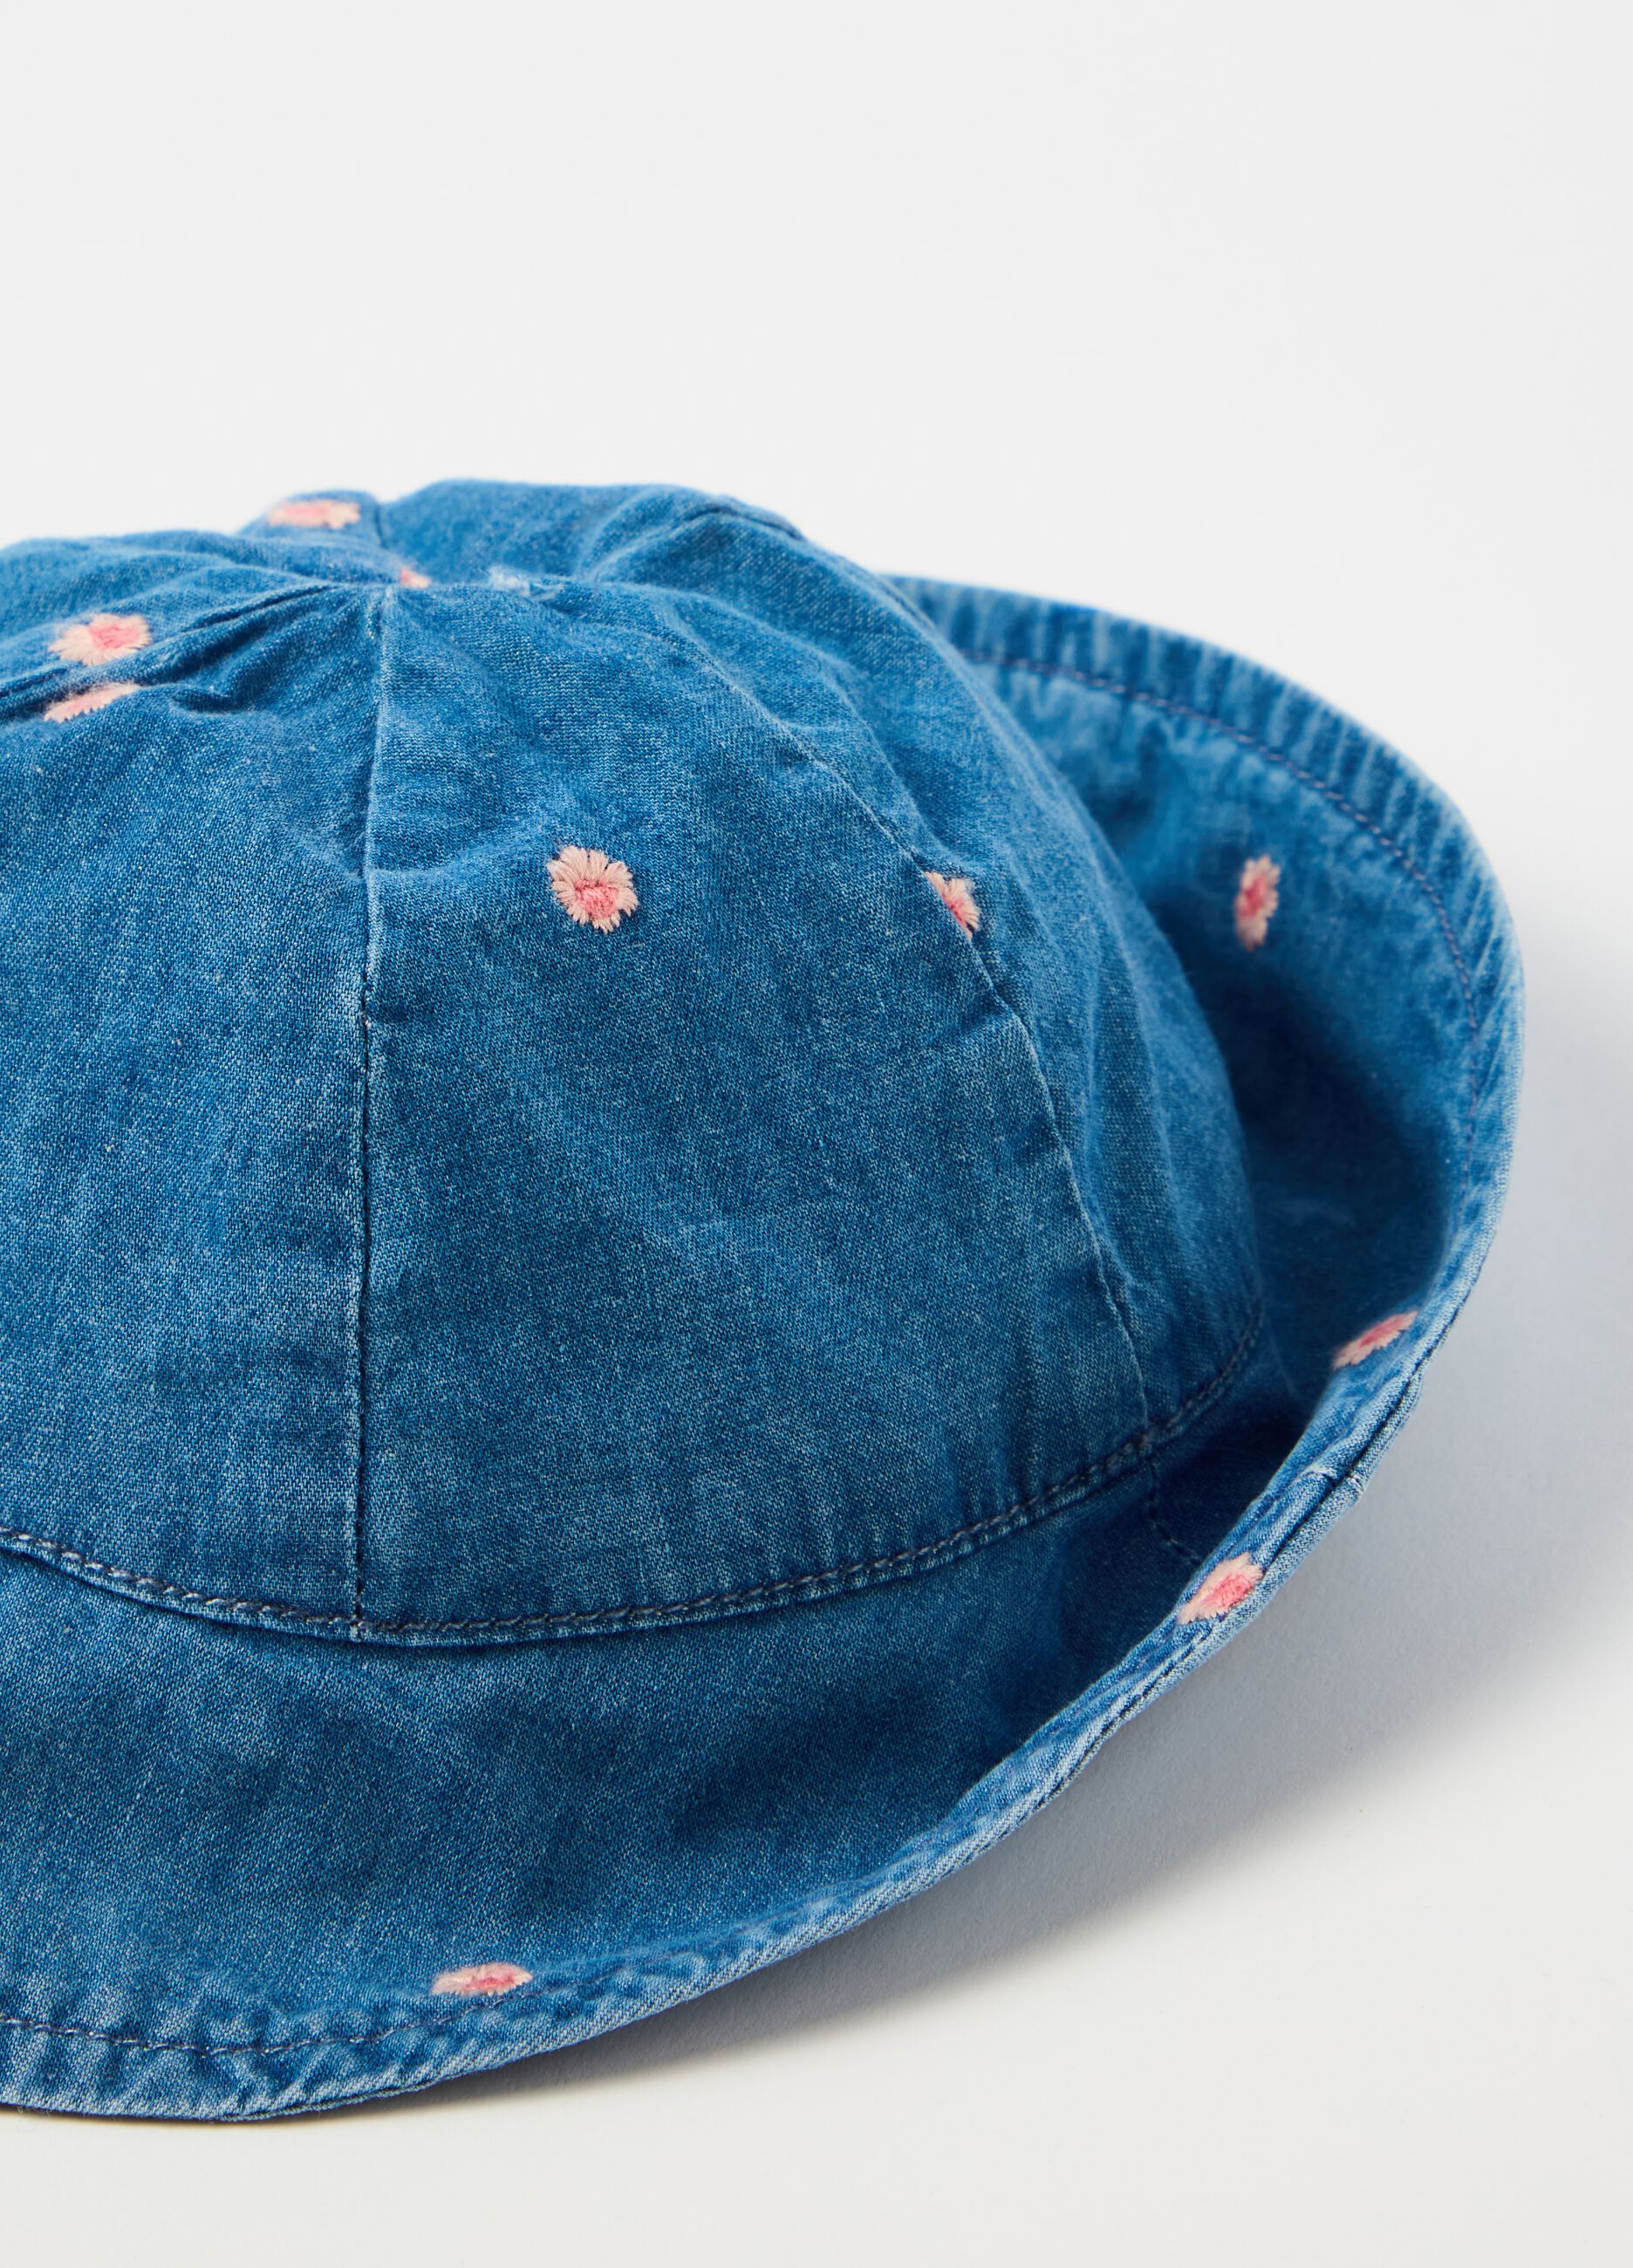 Fishing hat in denim with small flowers